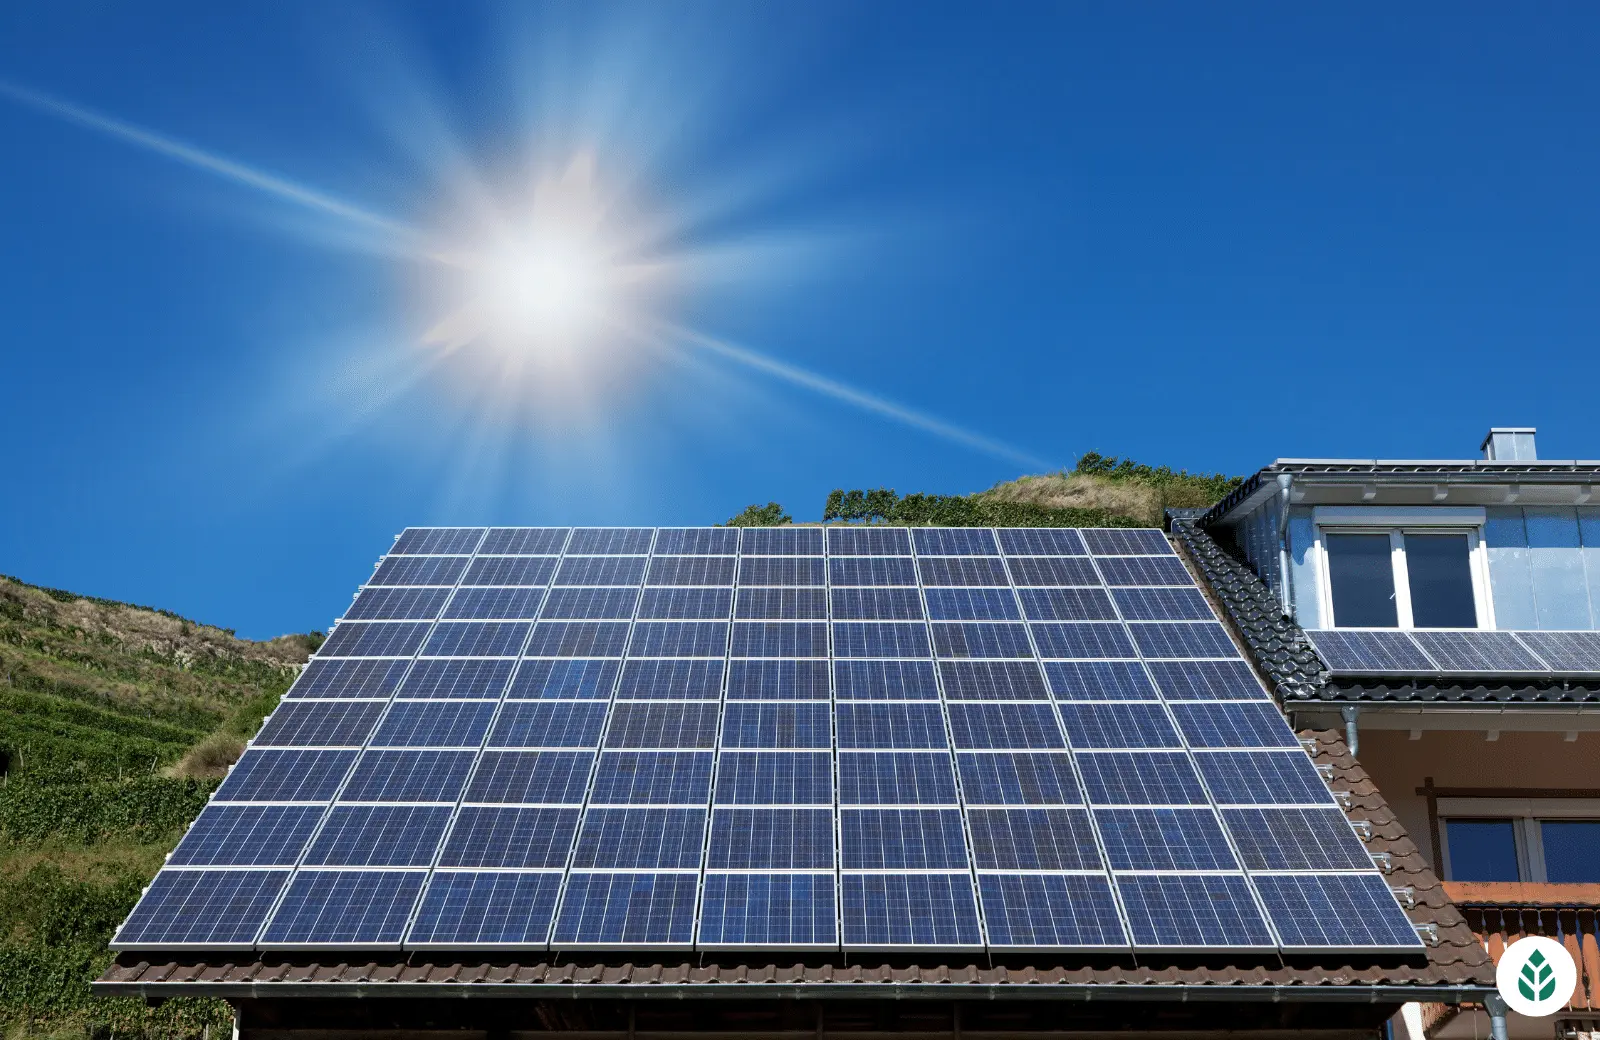 best climate for solar panels - What conditions are best for solar panels